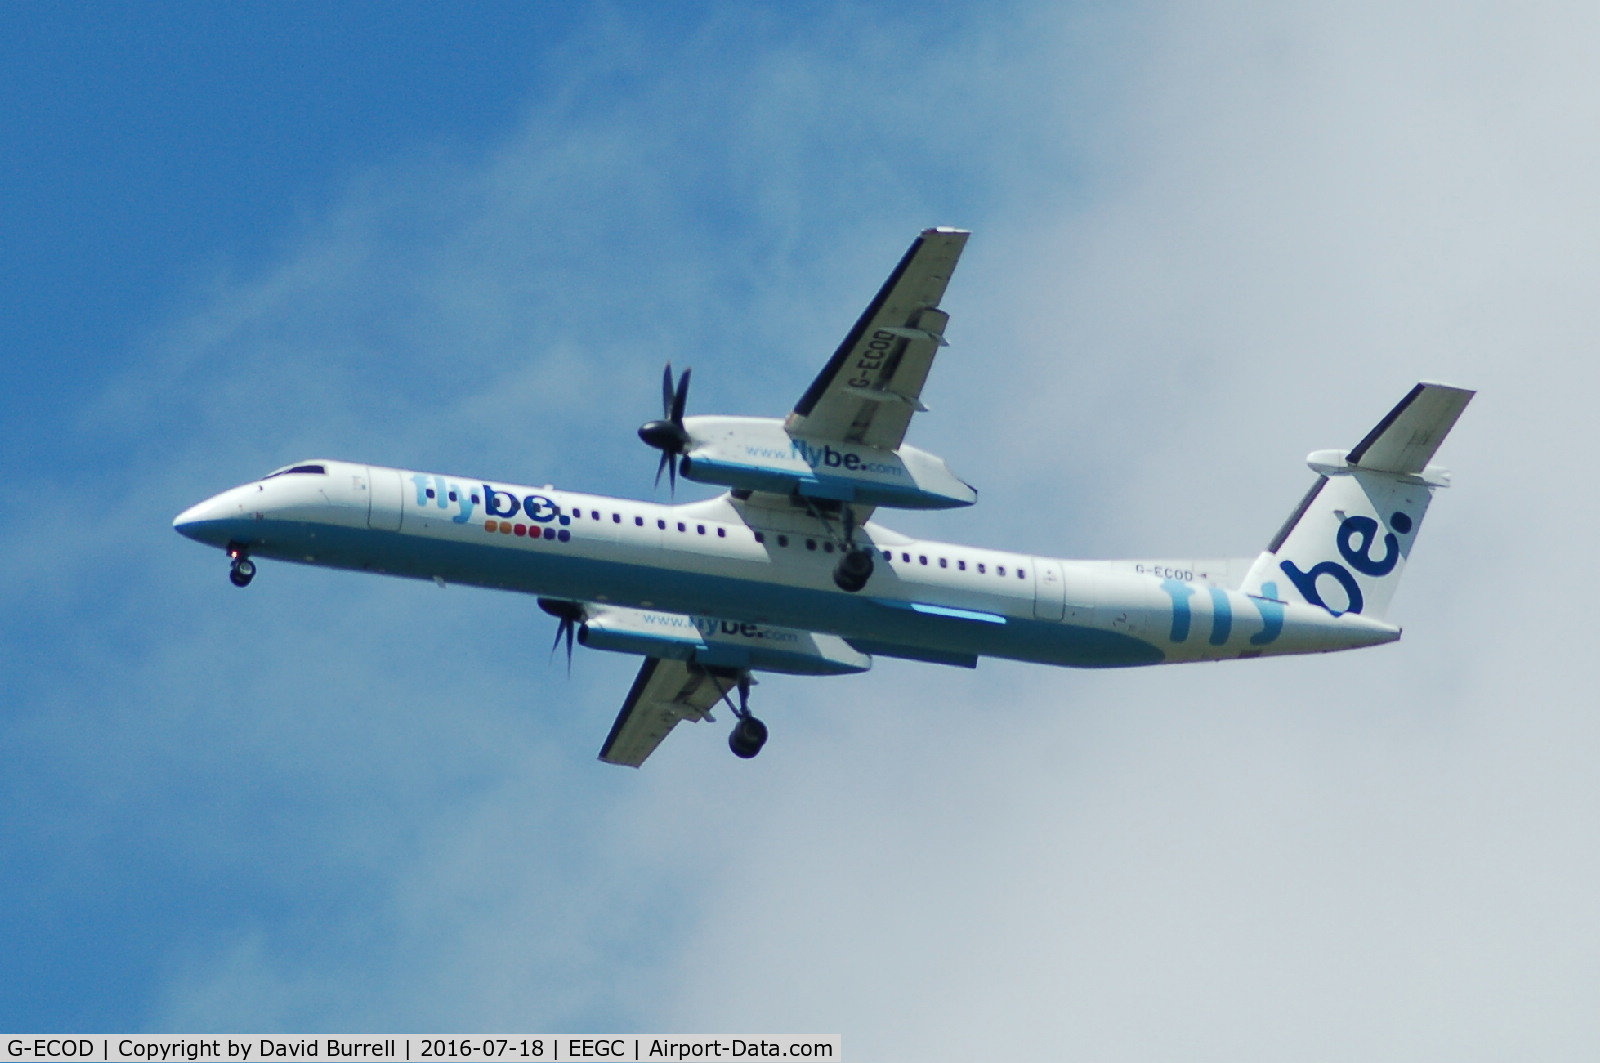 G-ECOD, 2008 De Havilland Canada DHC-8-402Q Dash 8 C/N 4206, FlyBe G-ECOD on approach to Manchester Airport.